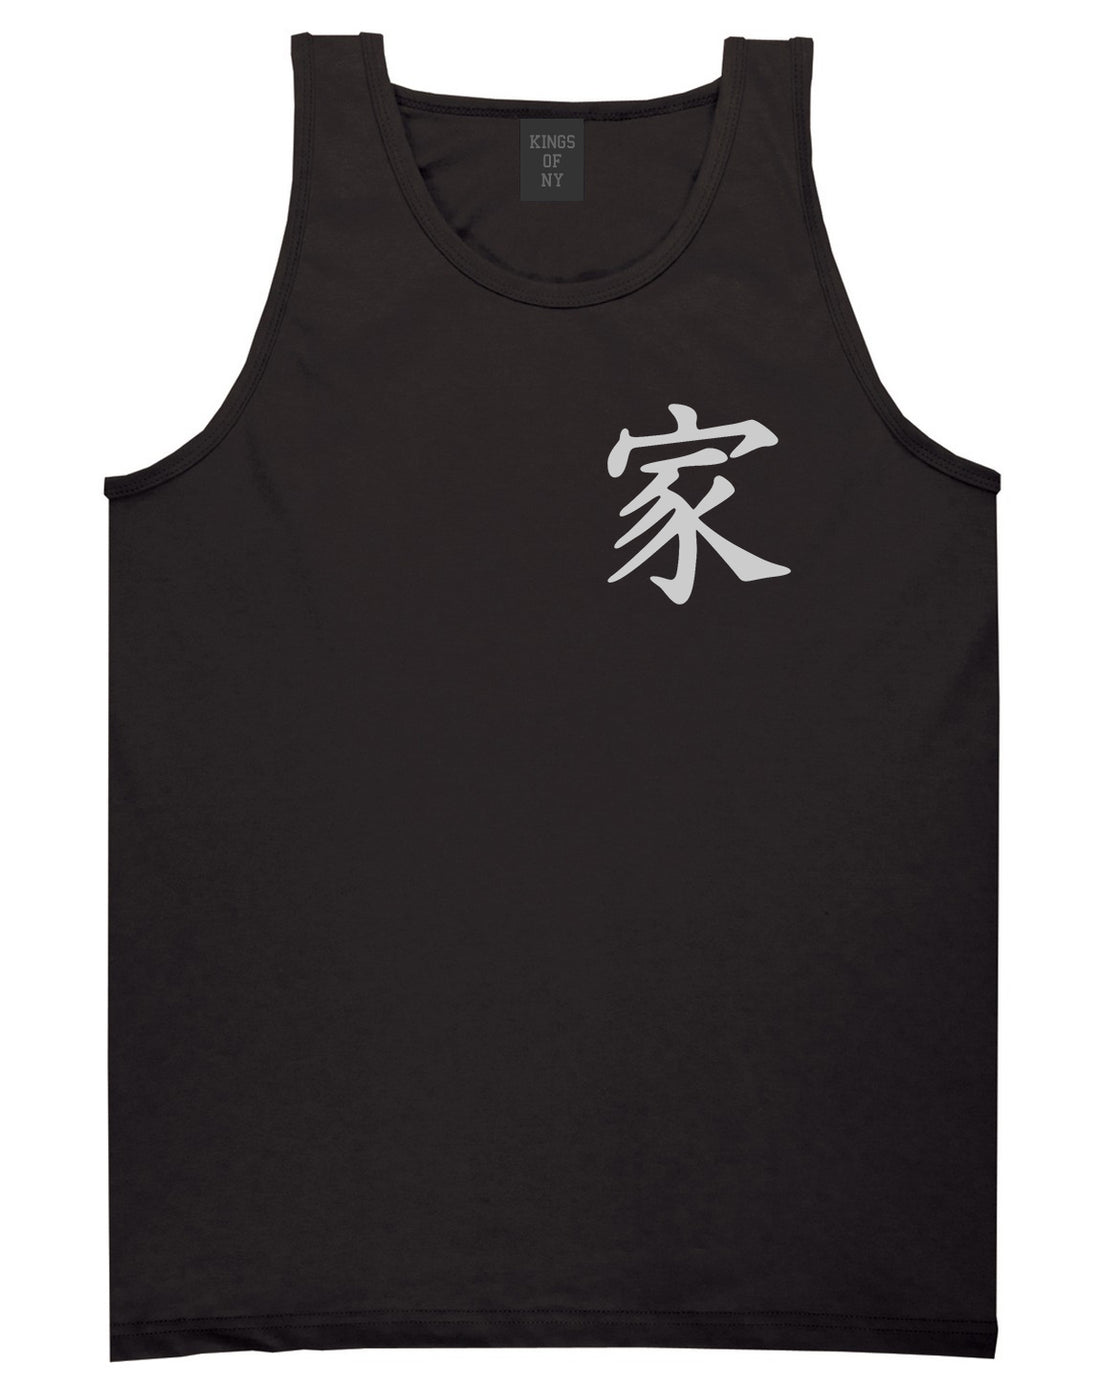 Chinese Symbol For Family Chest Mens Black Tank Top Shirt by KINGS OF NY